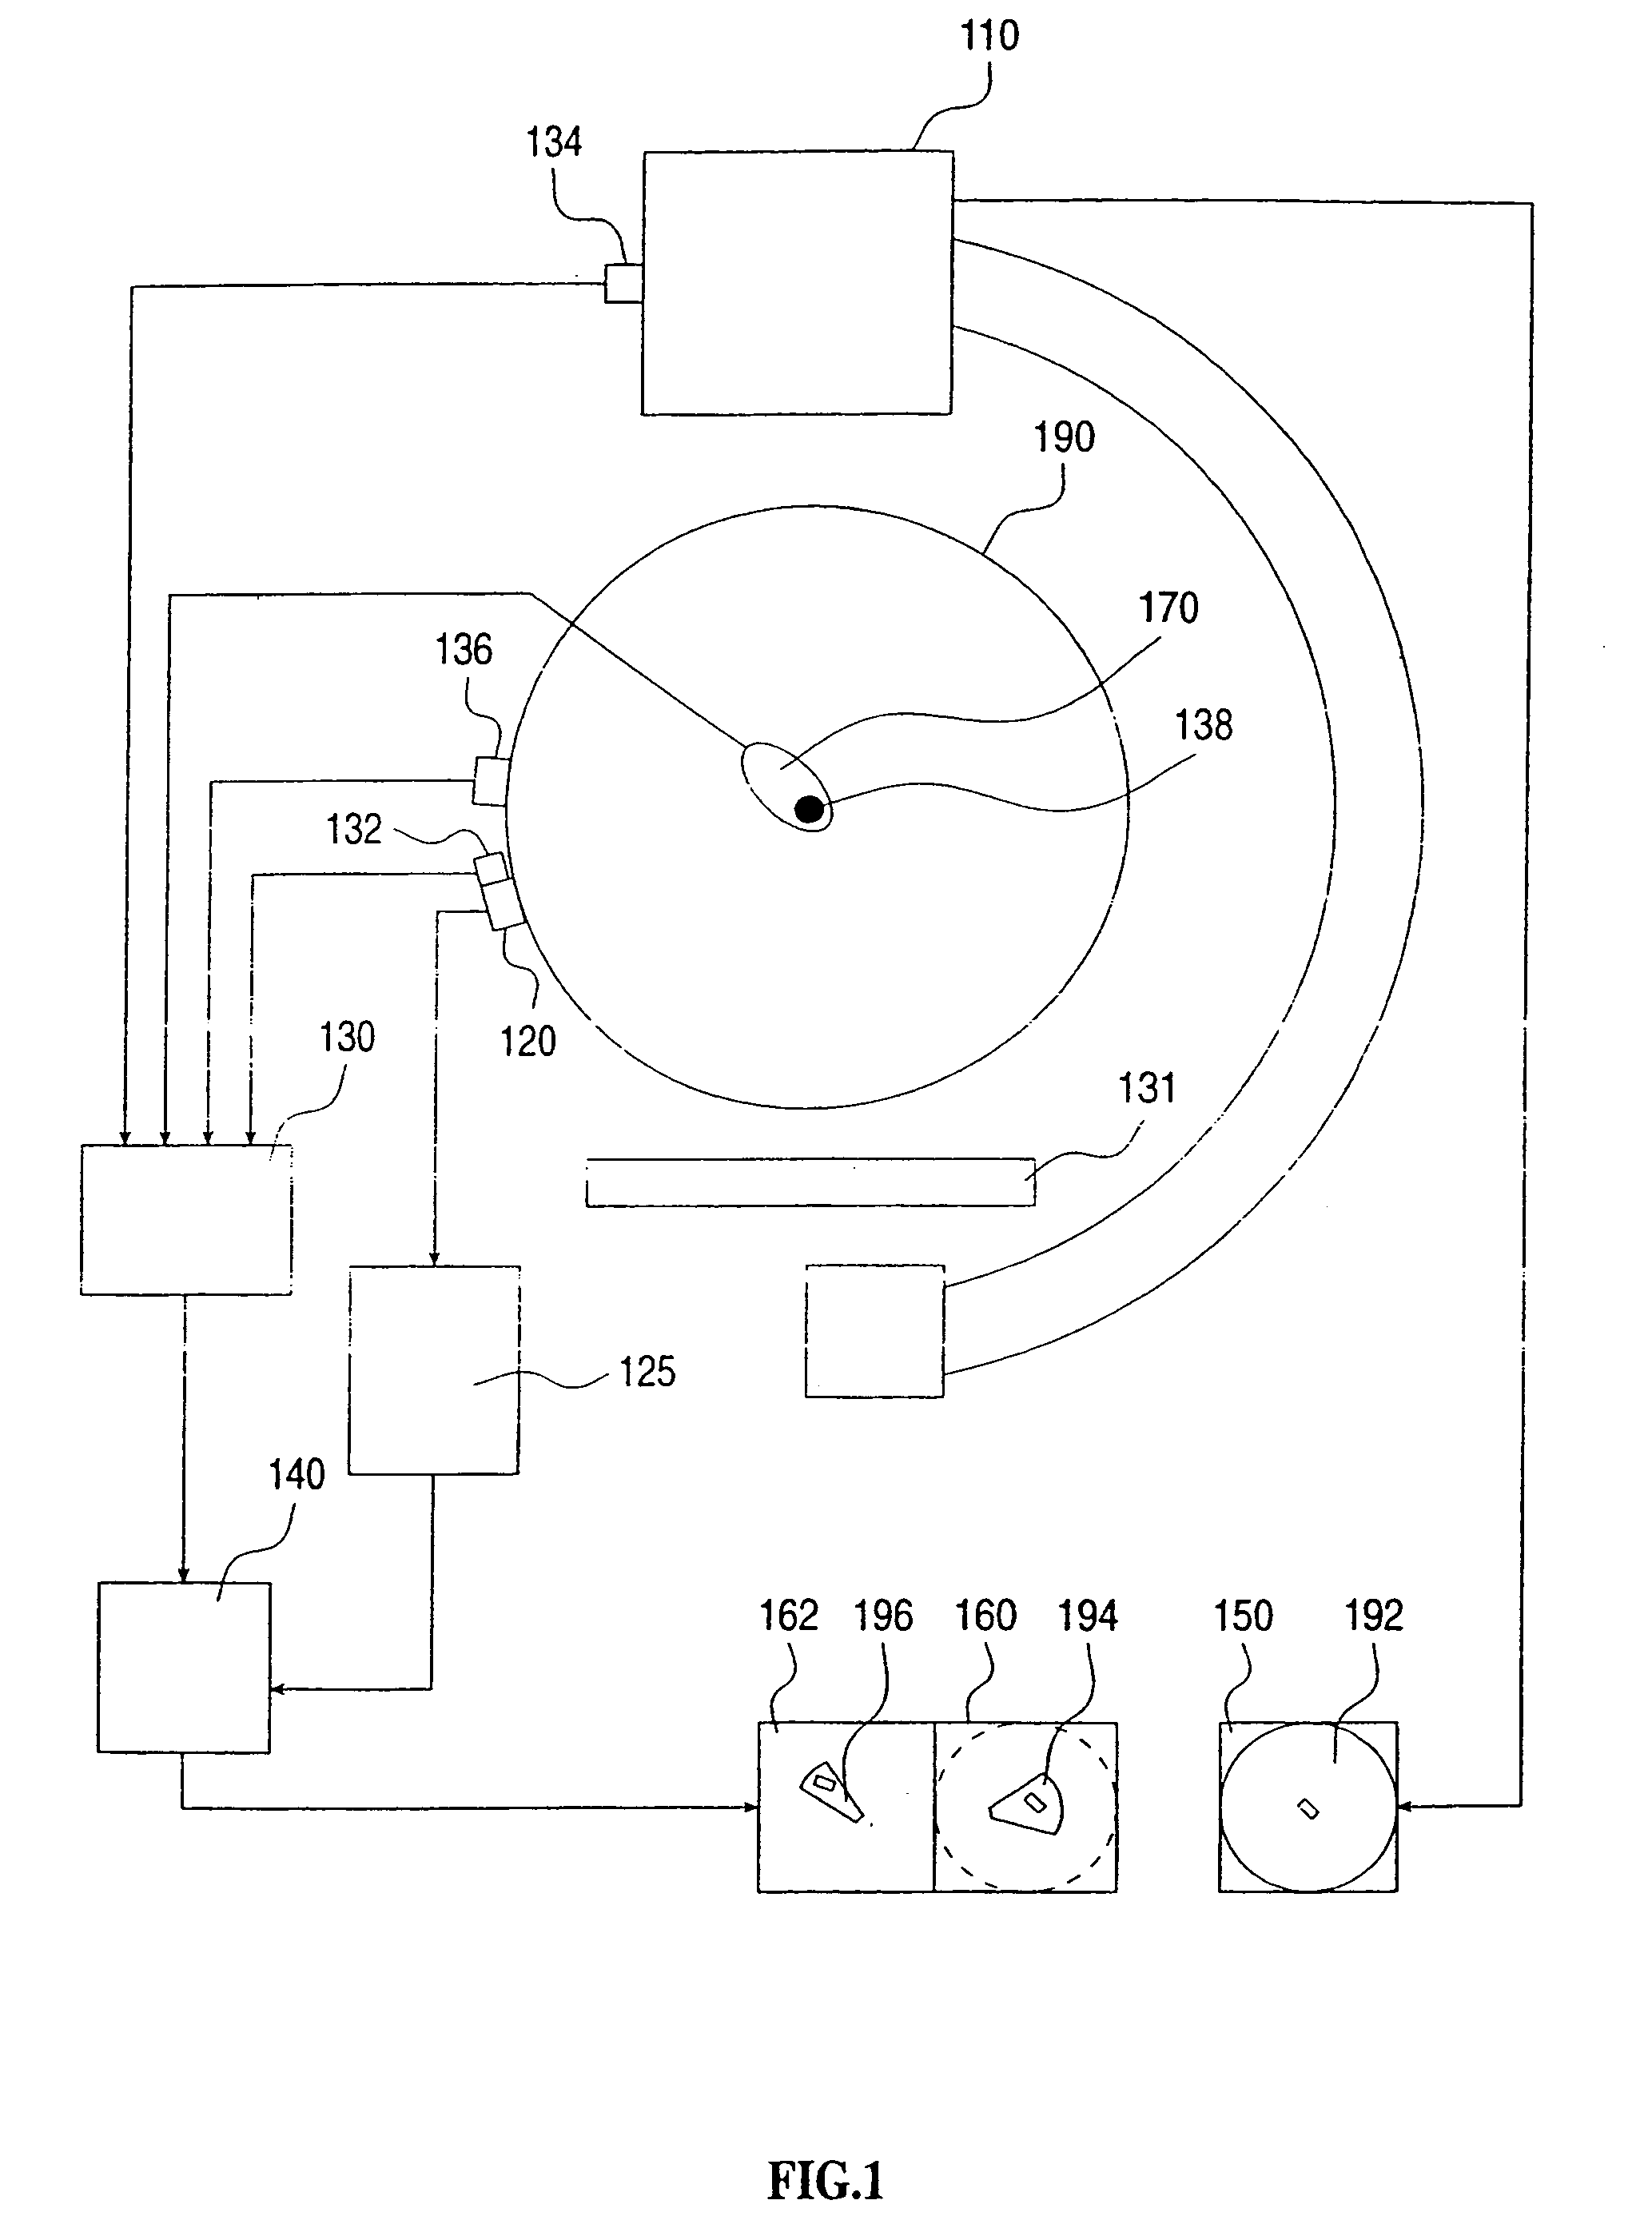 Method and system for displaying cross-sectional images of a body